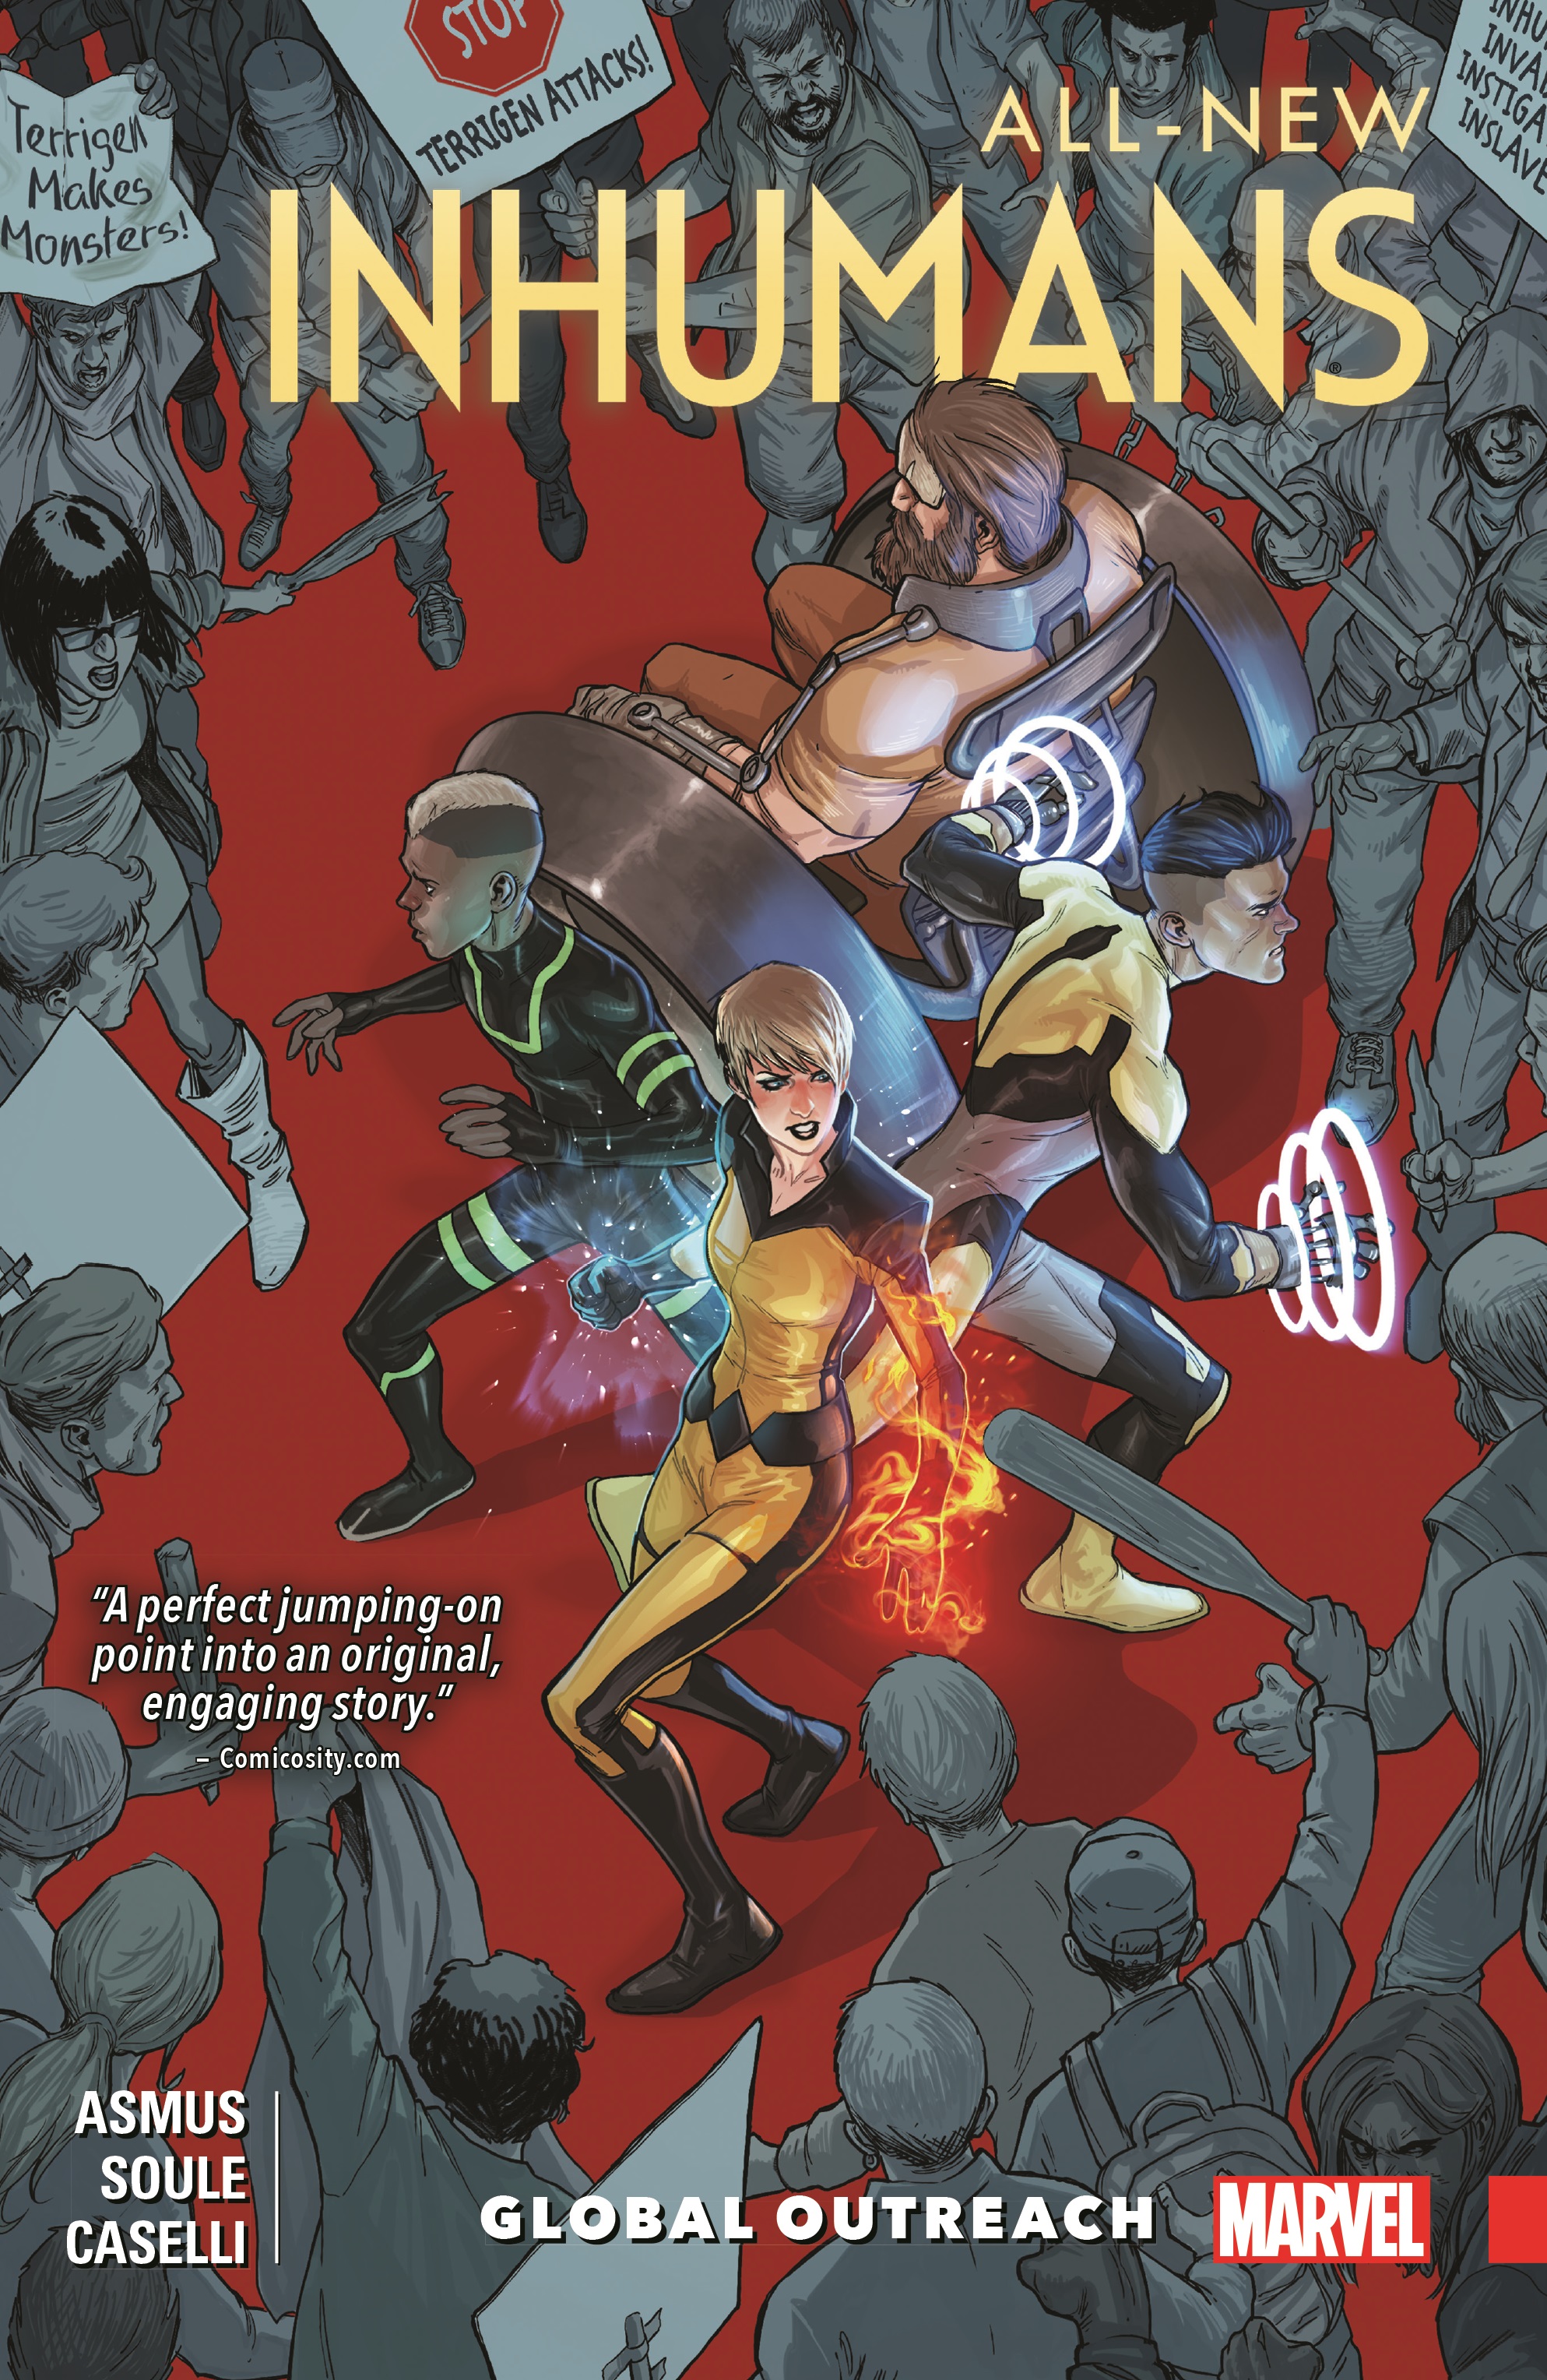 ALL-NEW INHUMANS VOL. 1: GLOBAL OUTREACH TPB (Trade Paperback)